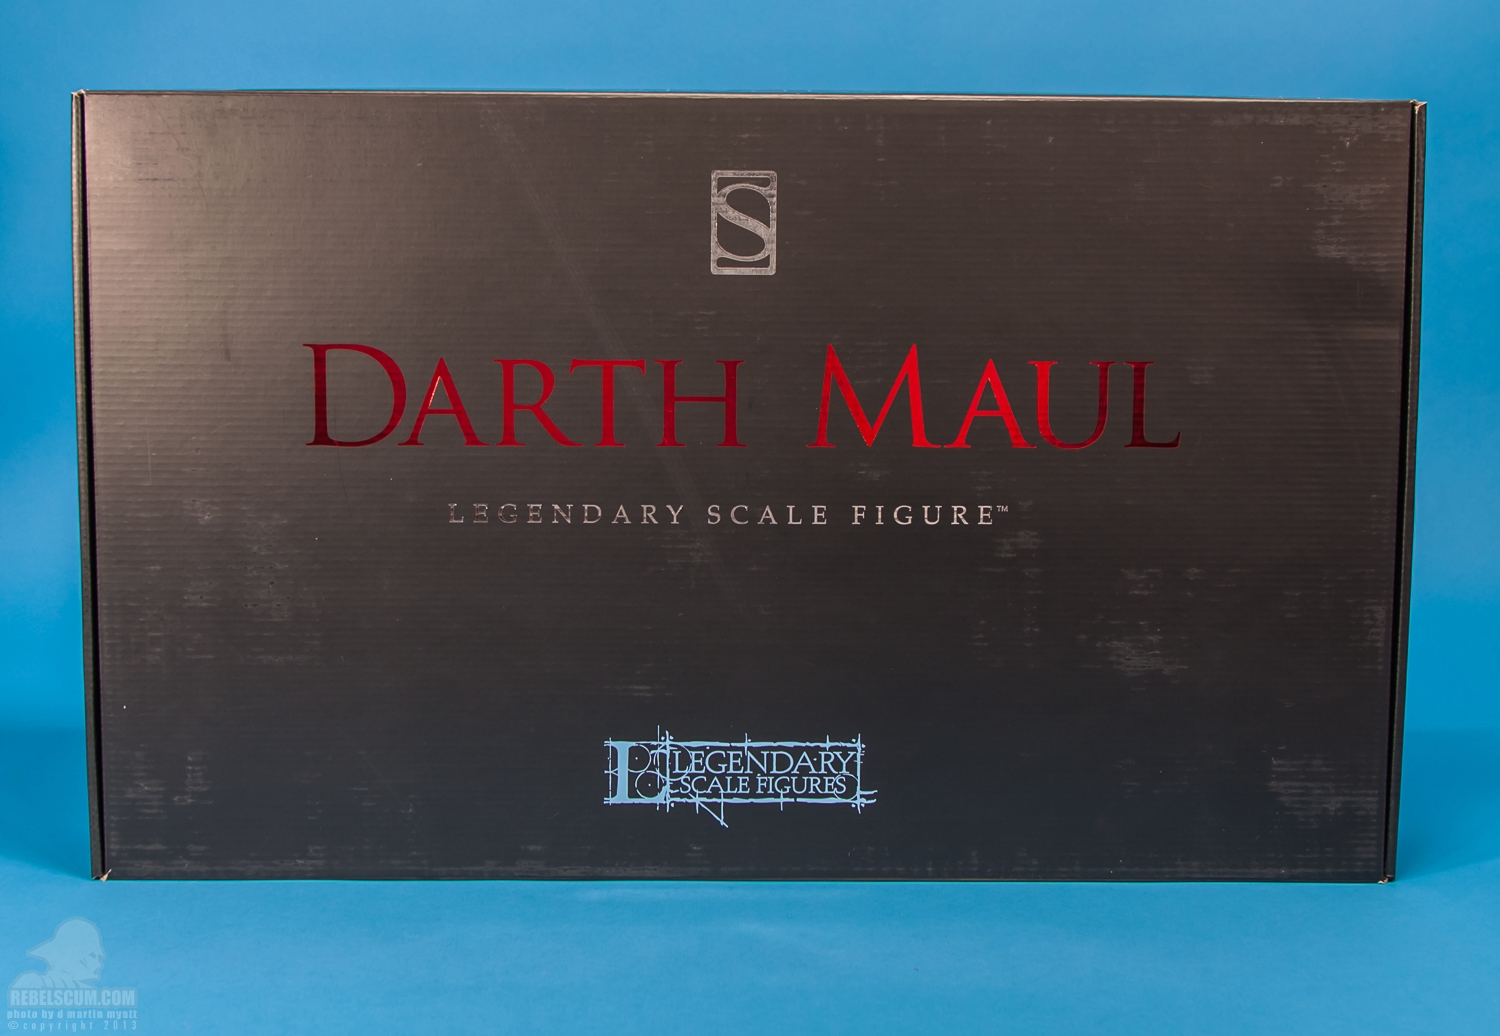 Darth_Maul_Legendary_Scale_Figure_Sideshow_Collectibles-56.jpg